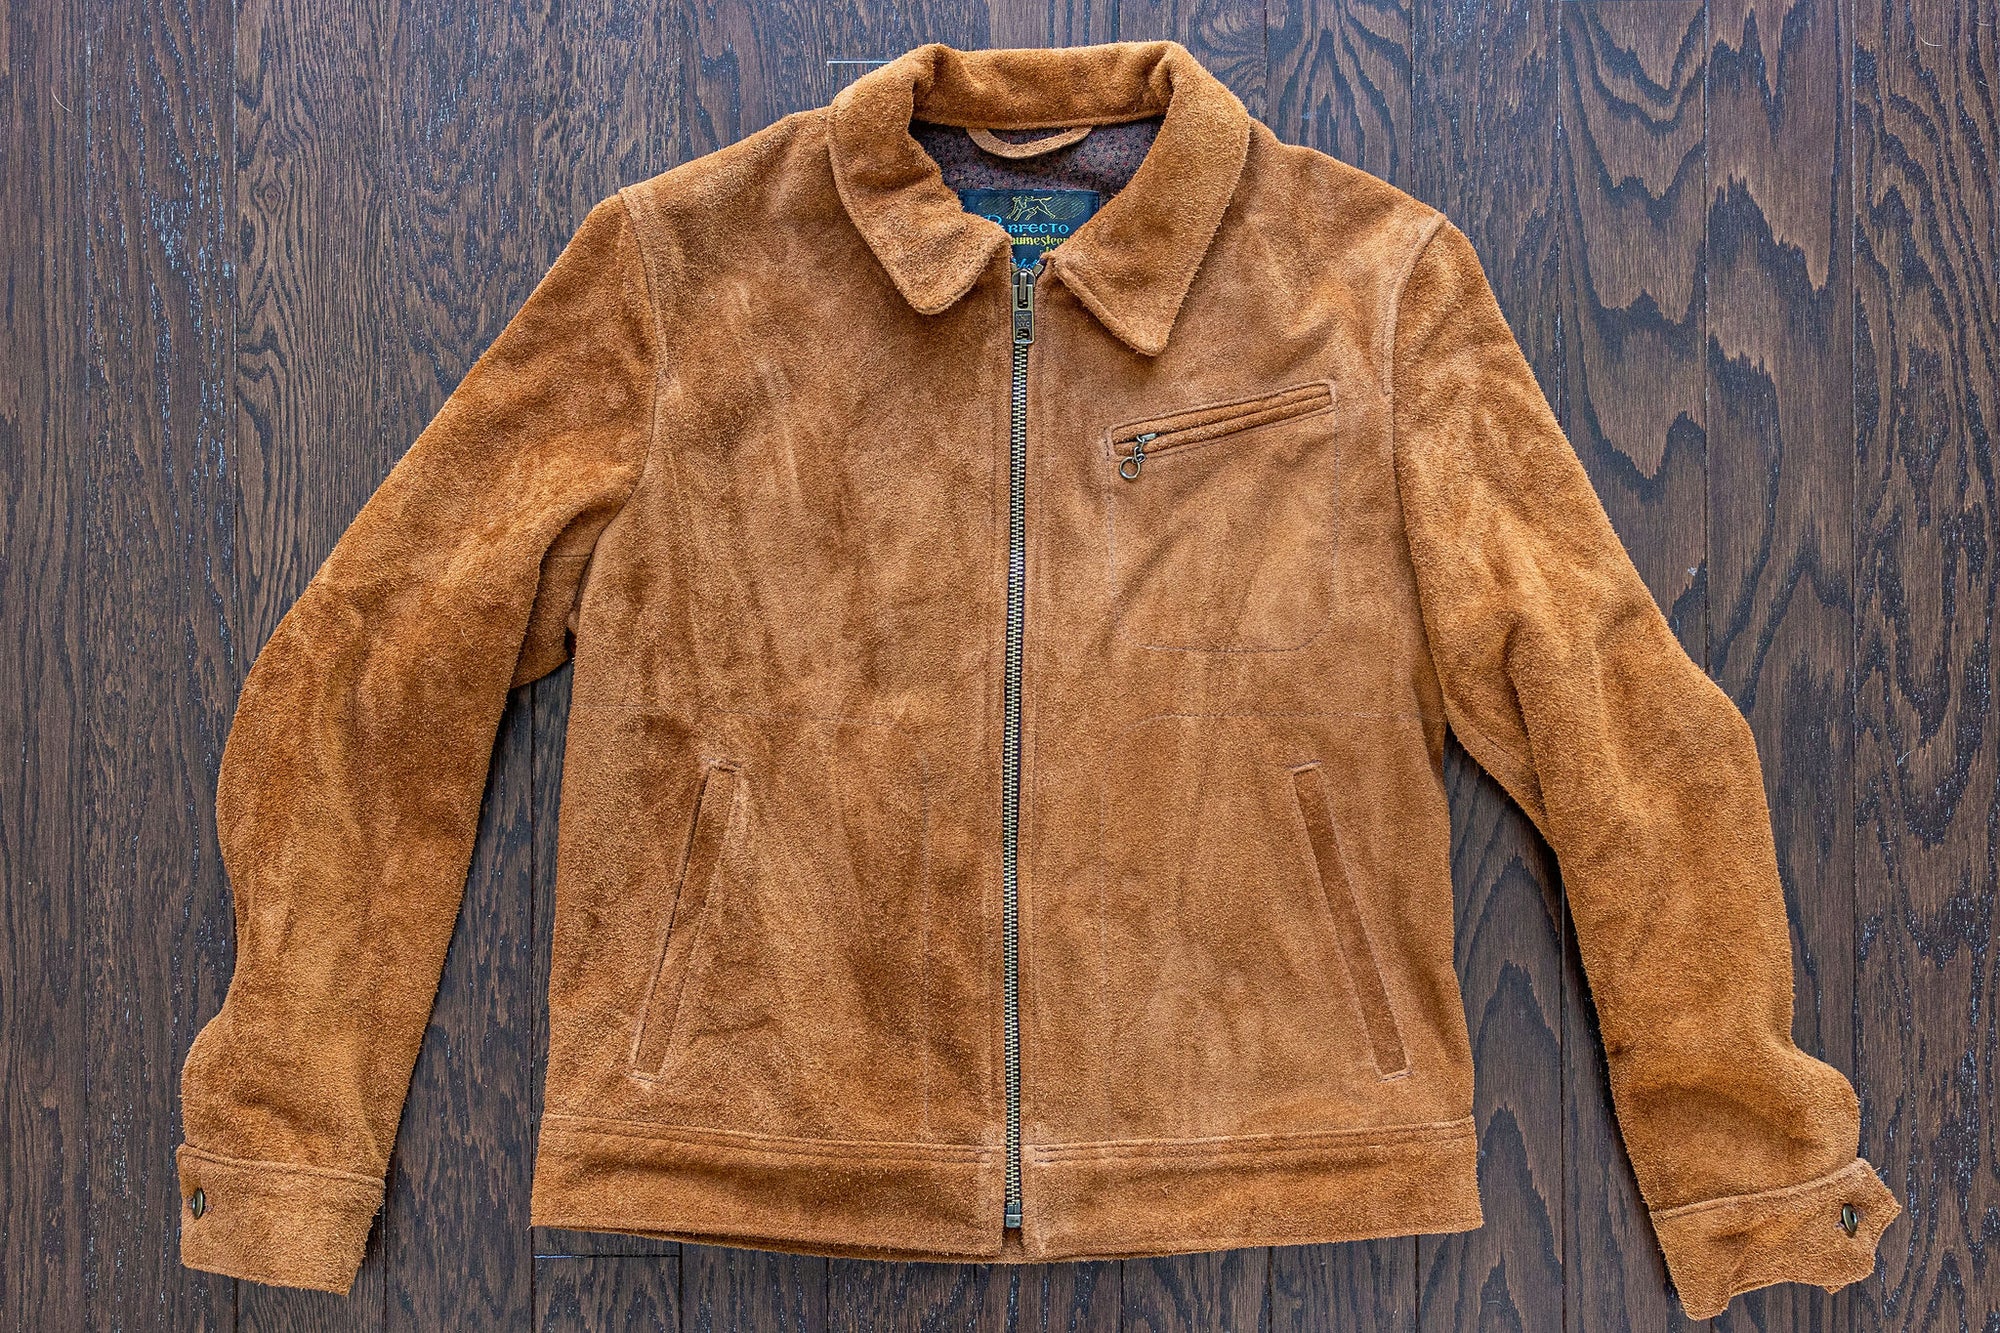 Schott NYC 375 Unlined Roughout Cowhide Jacket - Saddle